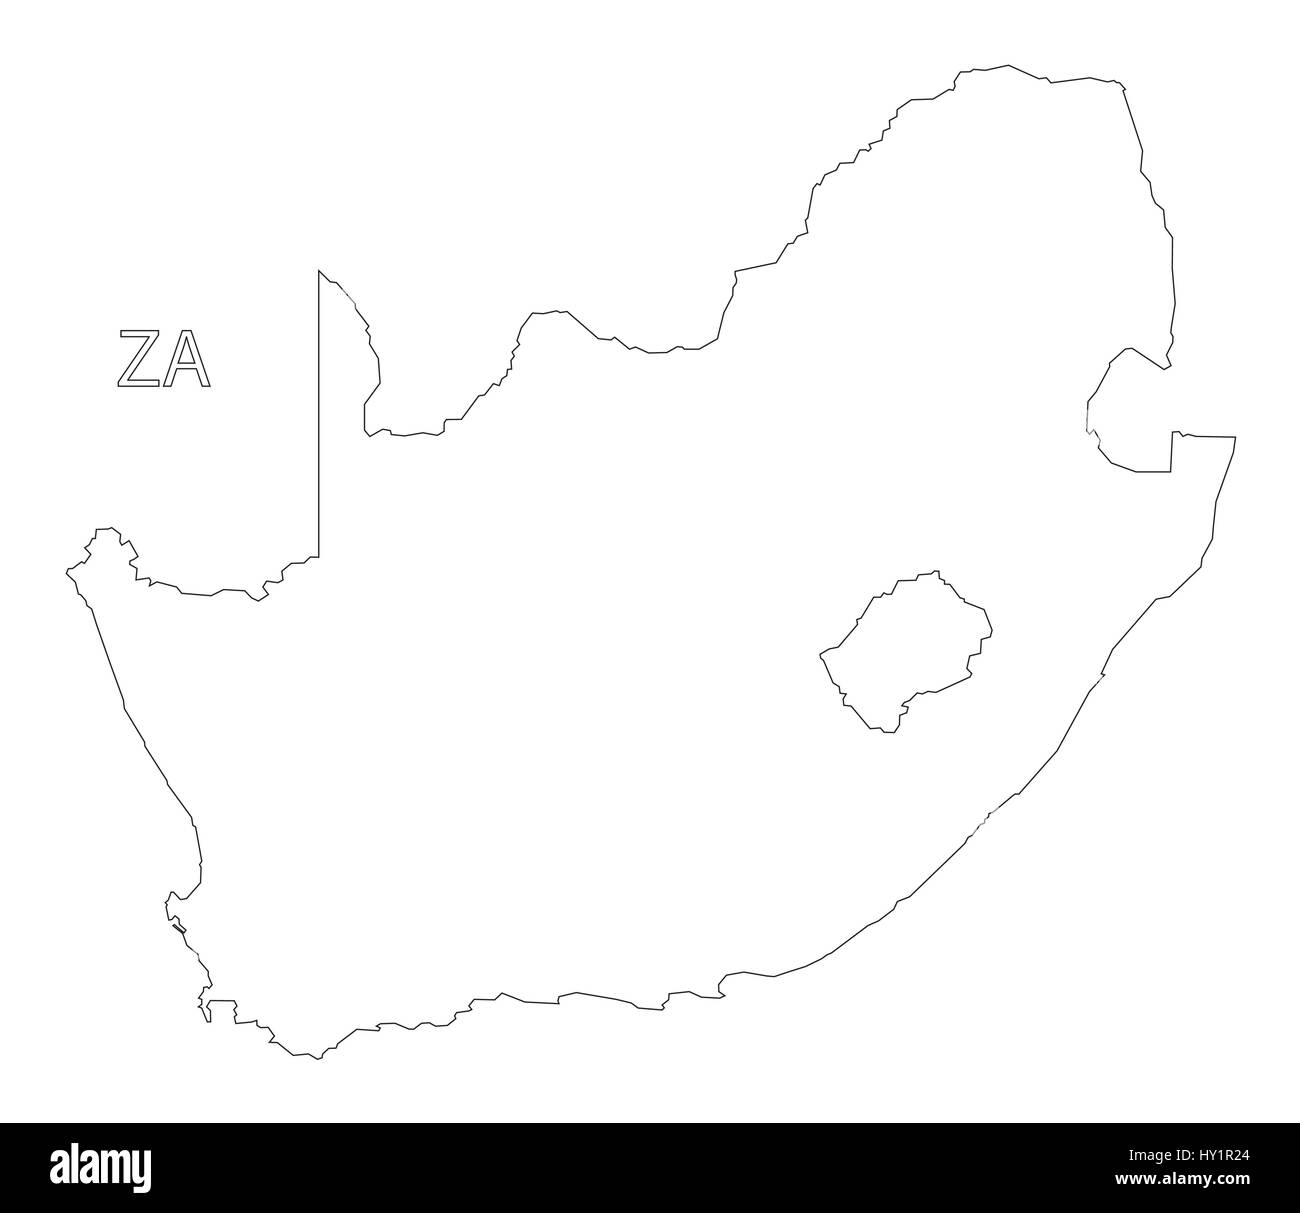 South Africa outline silhouette map illustration Stock Vector